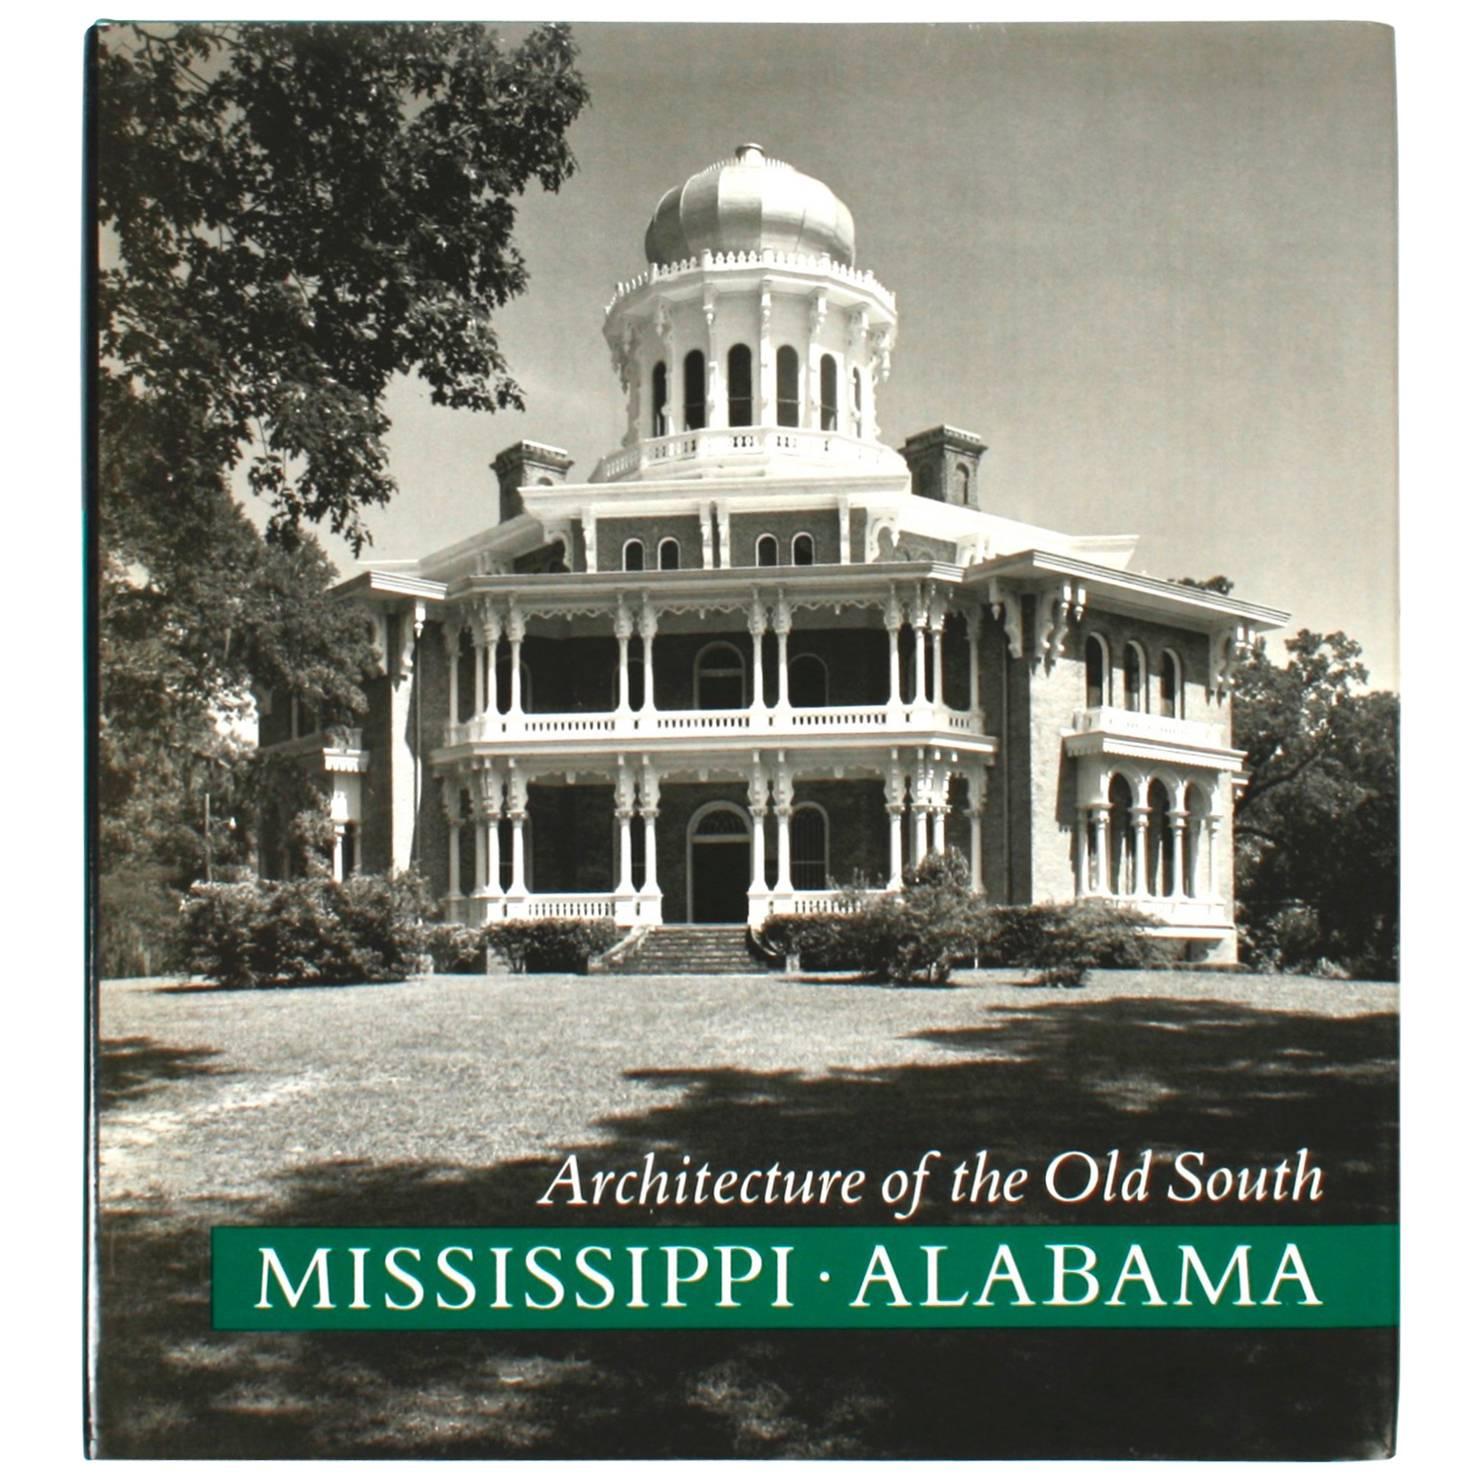 Architecture of the Old South: Mississippi and Alabama by Mills Lane, 1st Ed